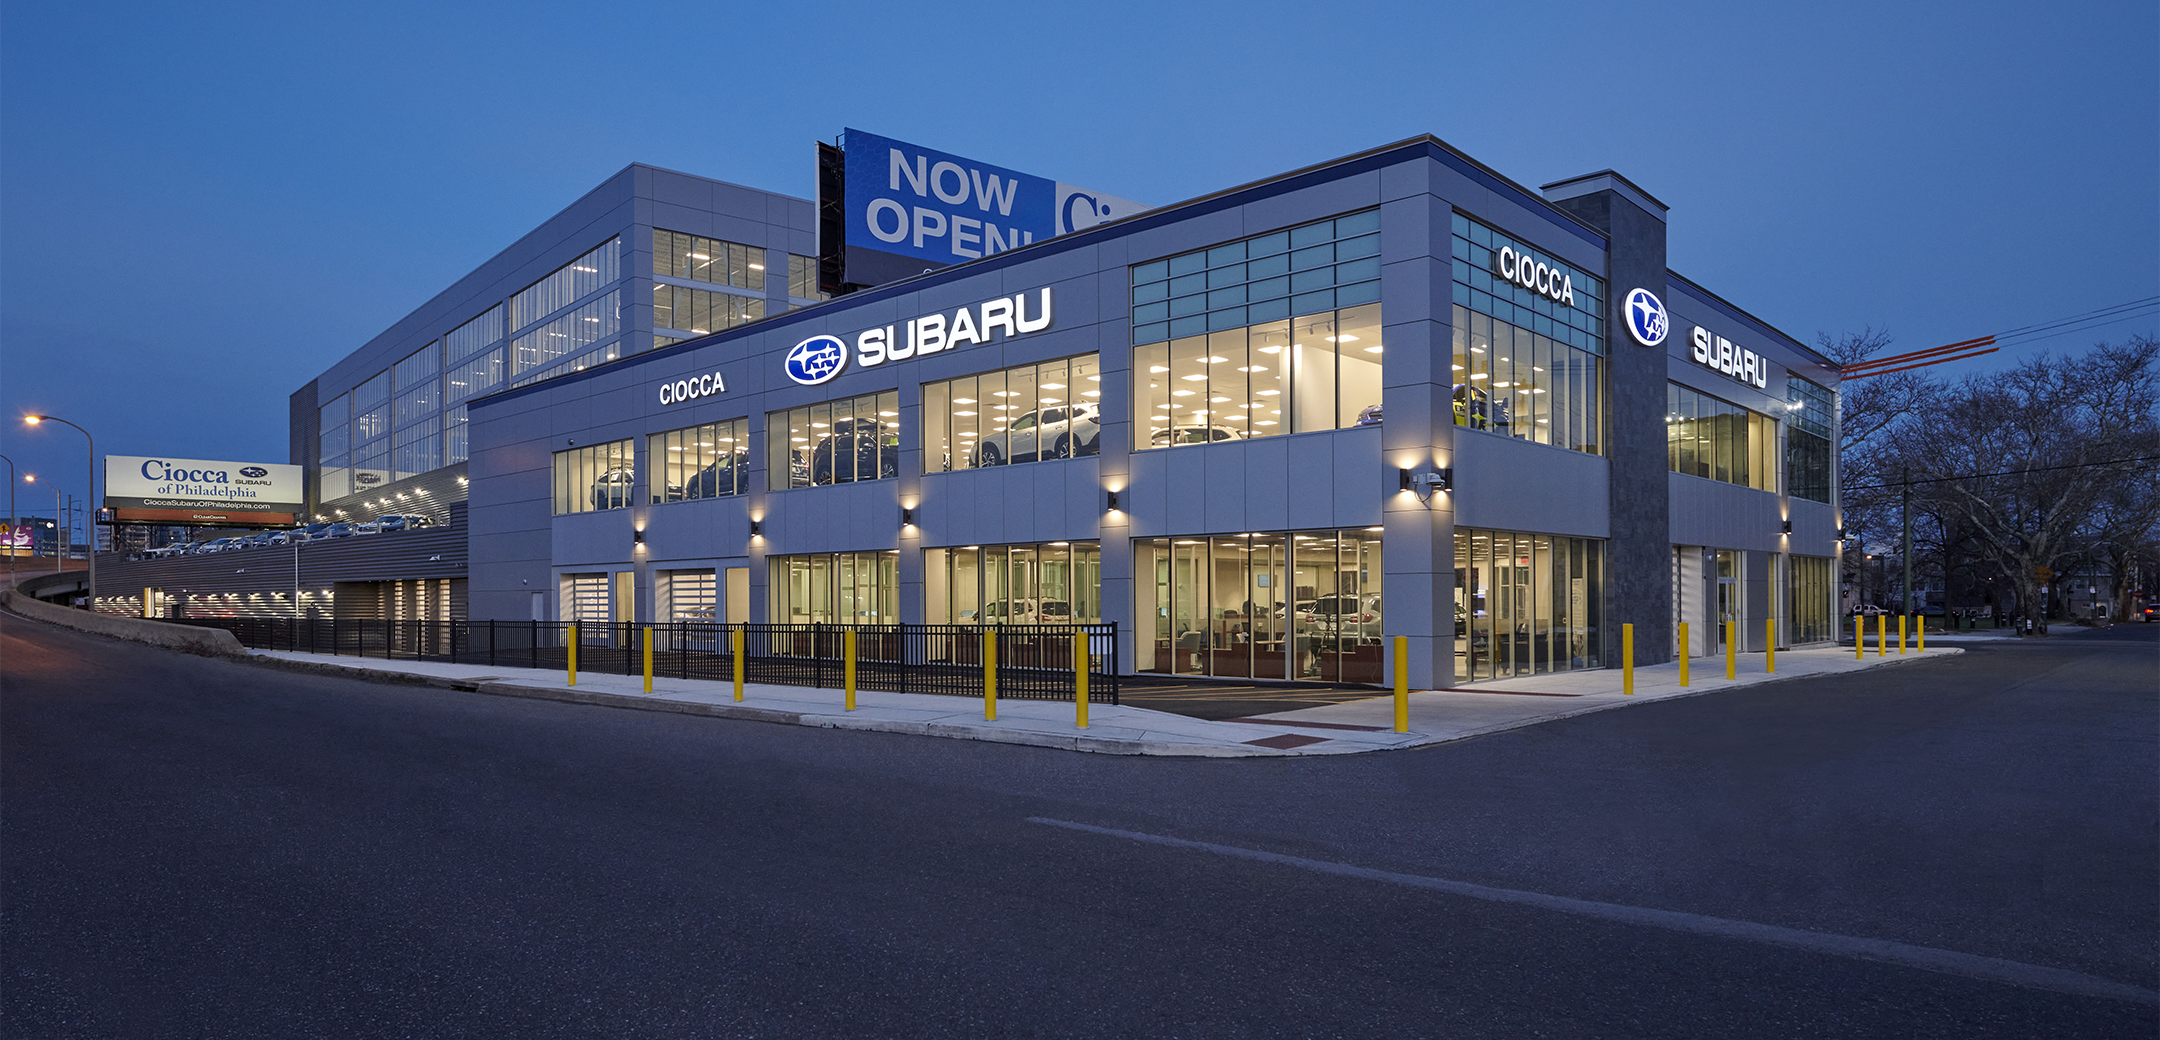 An exterior night view of the Ciocca Subaru two story, large glass window design building showcasing the cars, "Subaru" logo, driveway and highway entrance road on the side.